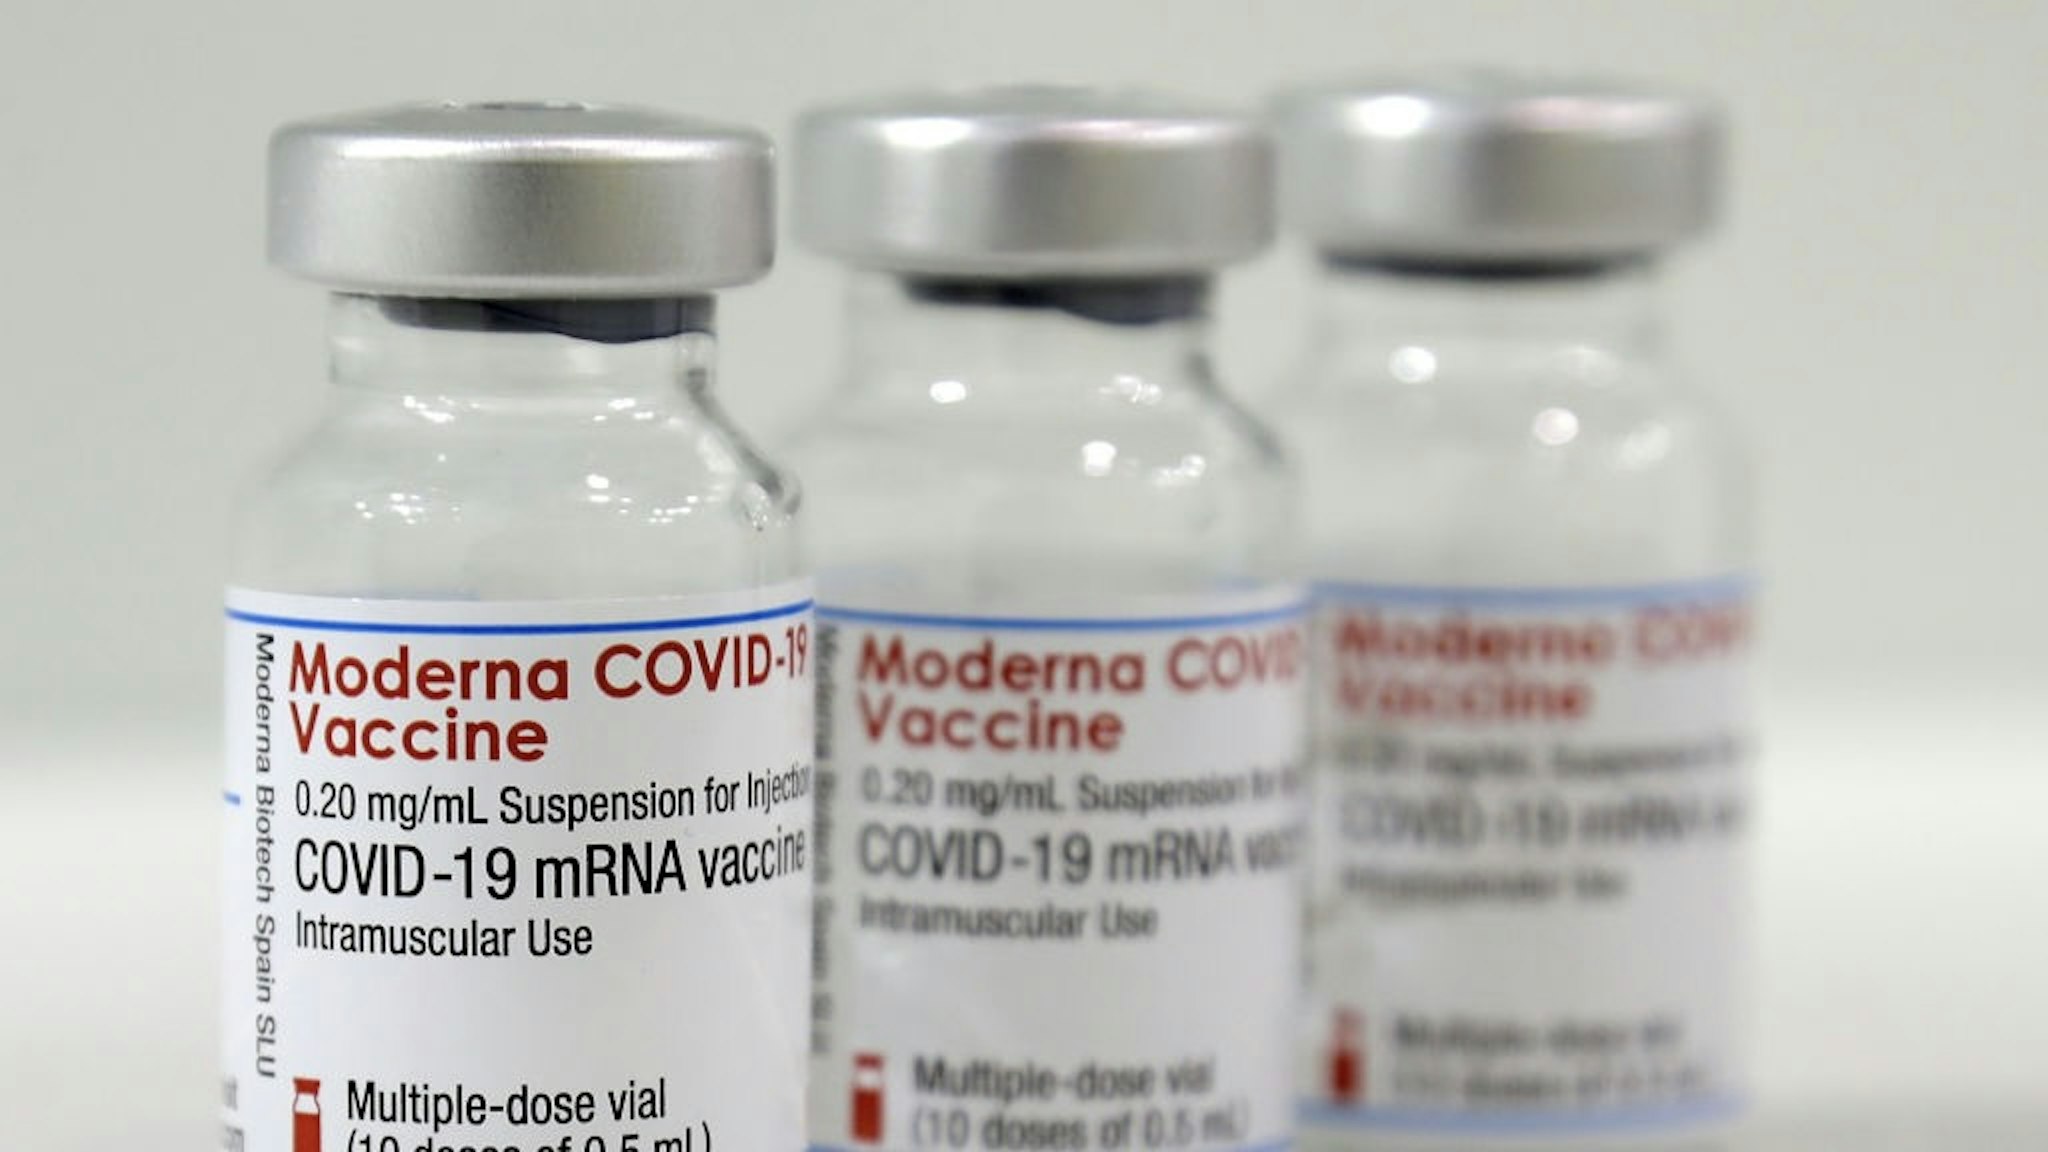 BERLIN, GERMANY - FEBRUARY 17: Three vials of the 'Moderna COVID-19 Vaccine' are pictured at a new coronavirus, COVID-19, vaccination center at the 'Velodrom' (velodrome-stadium) on February 17, 2021 in Berlin, Germany. (Photo by Michael Sohn - Pool/Getty Images)